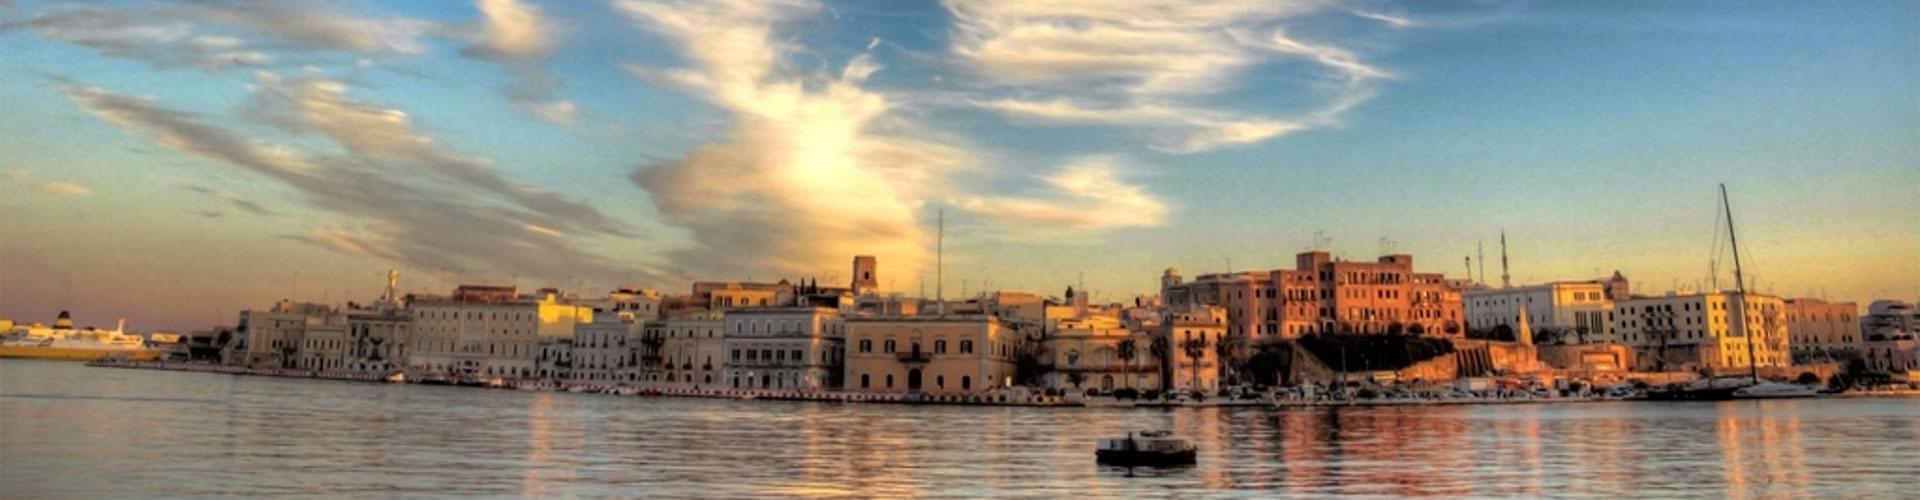 The history of Brindisi